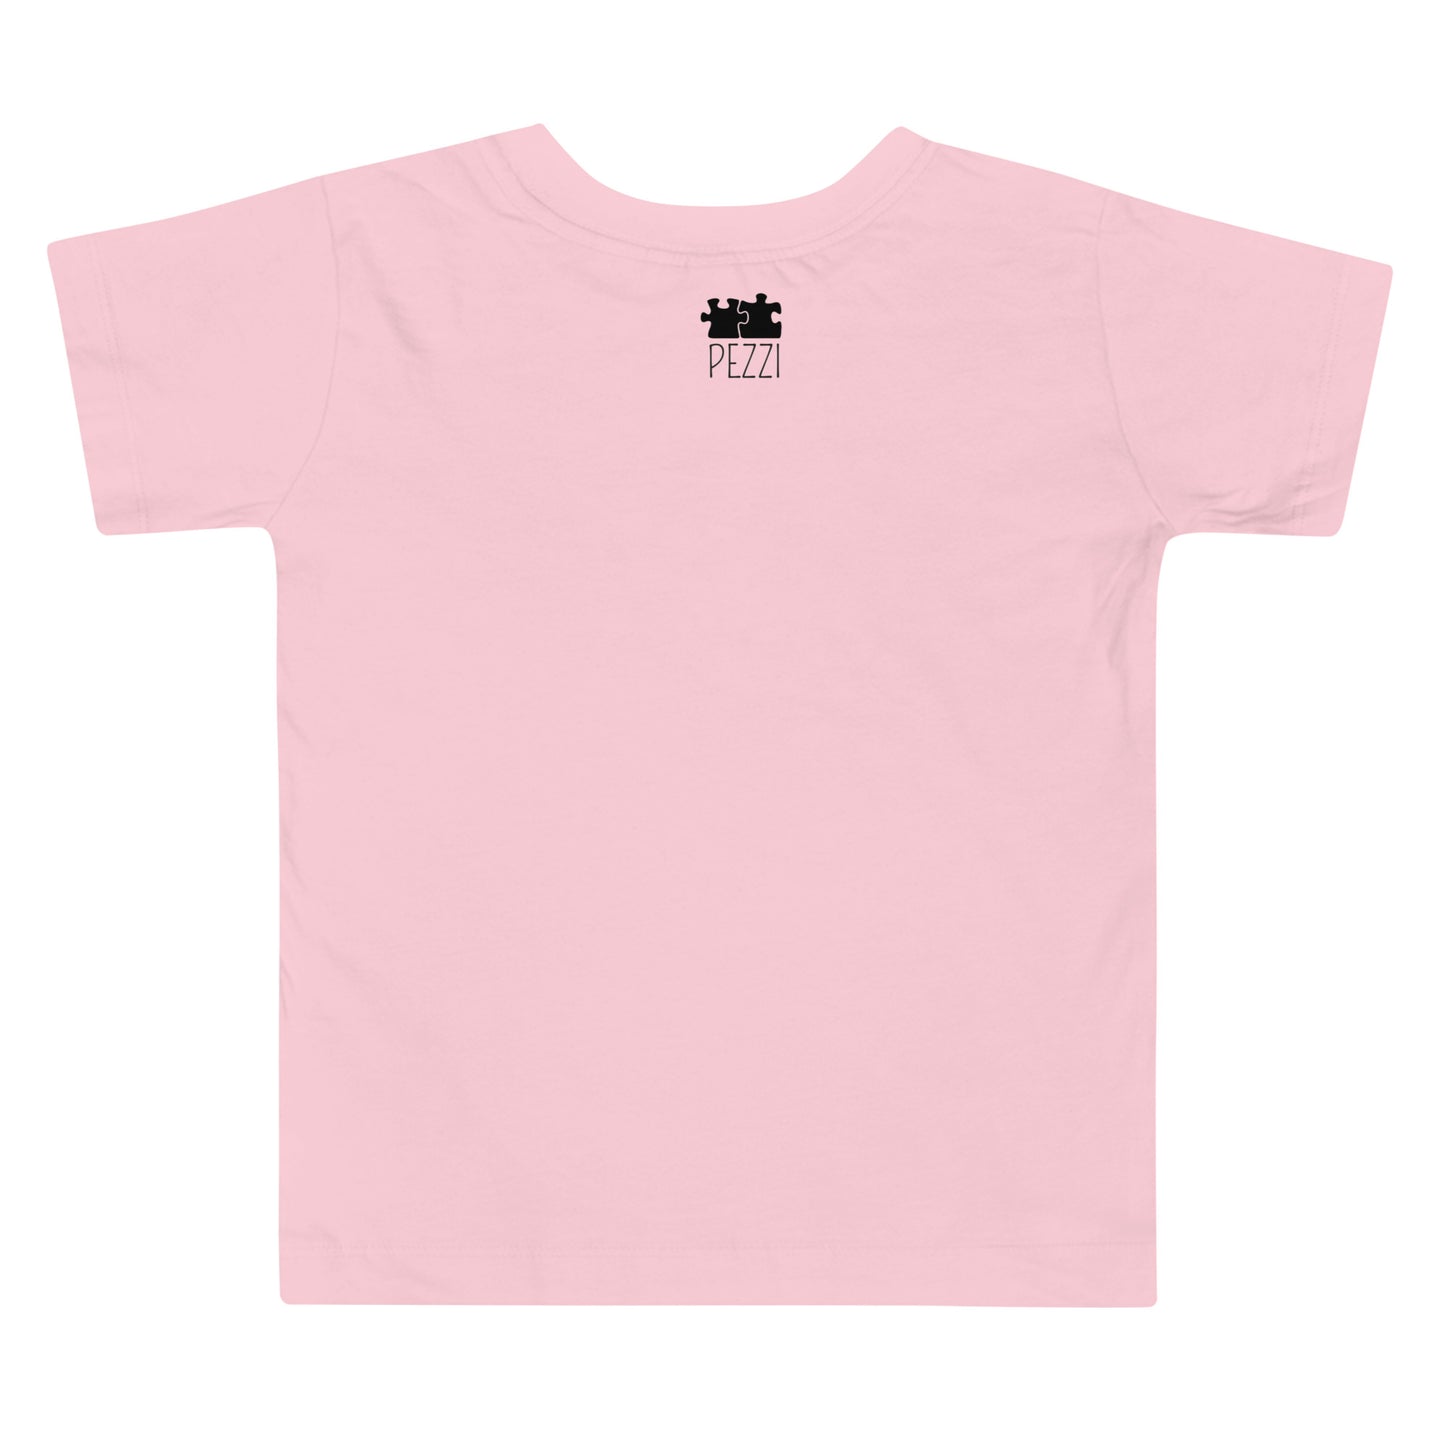 Panettone on a Toddler Short Sleeve Tee